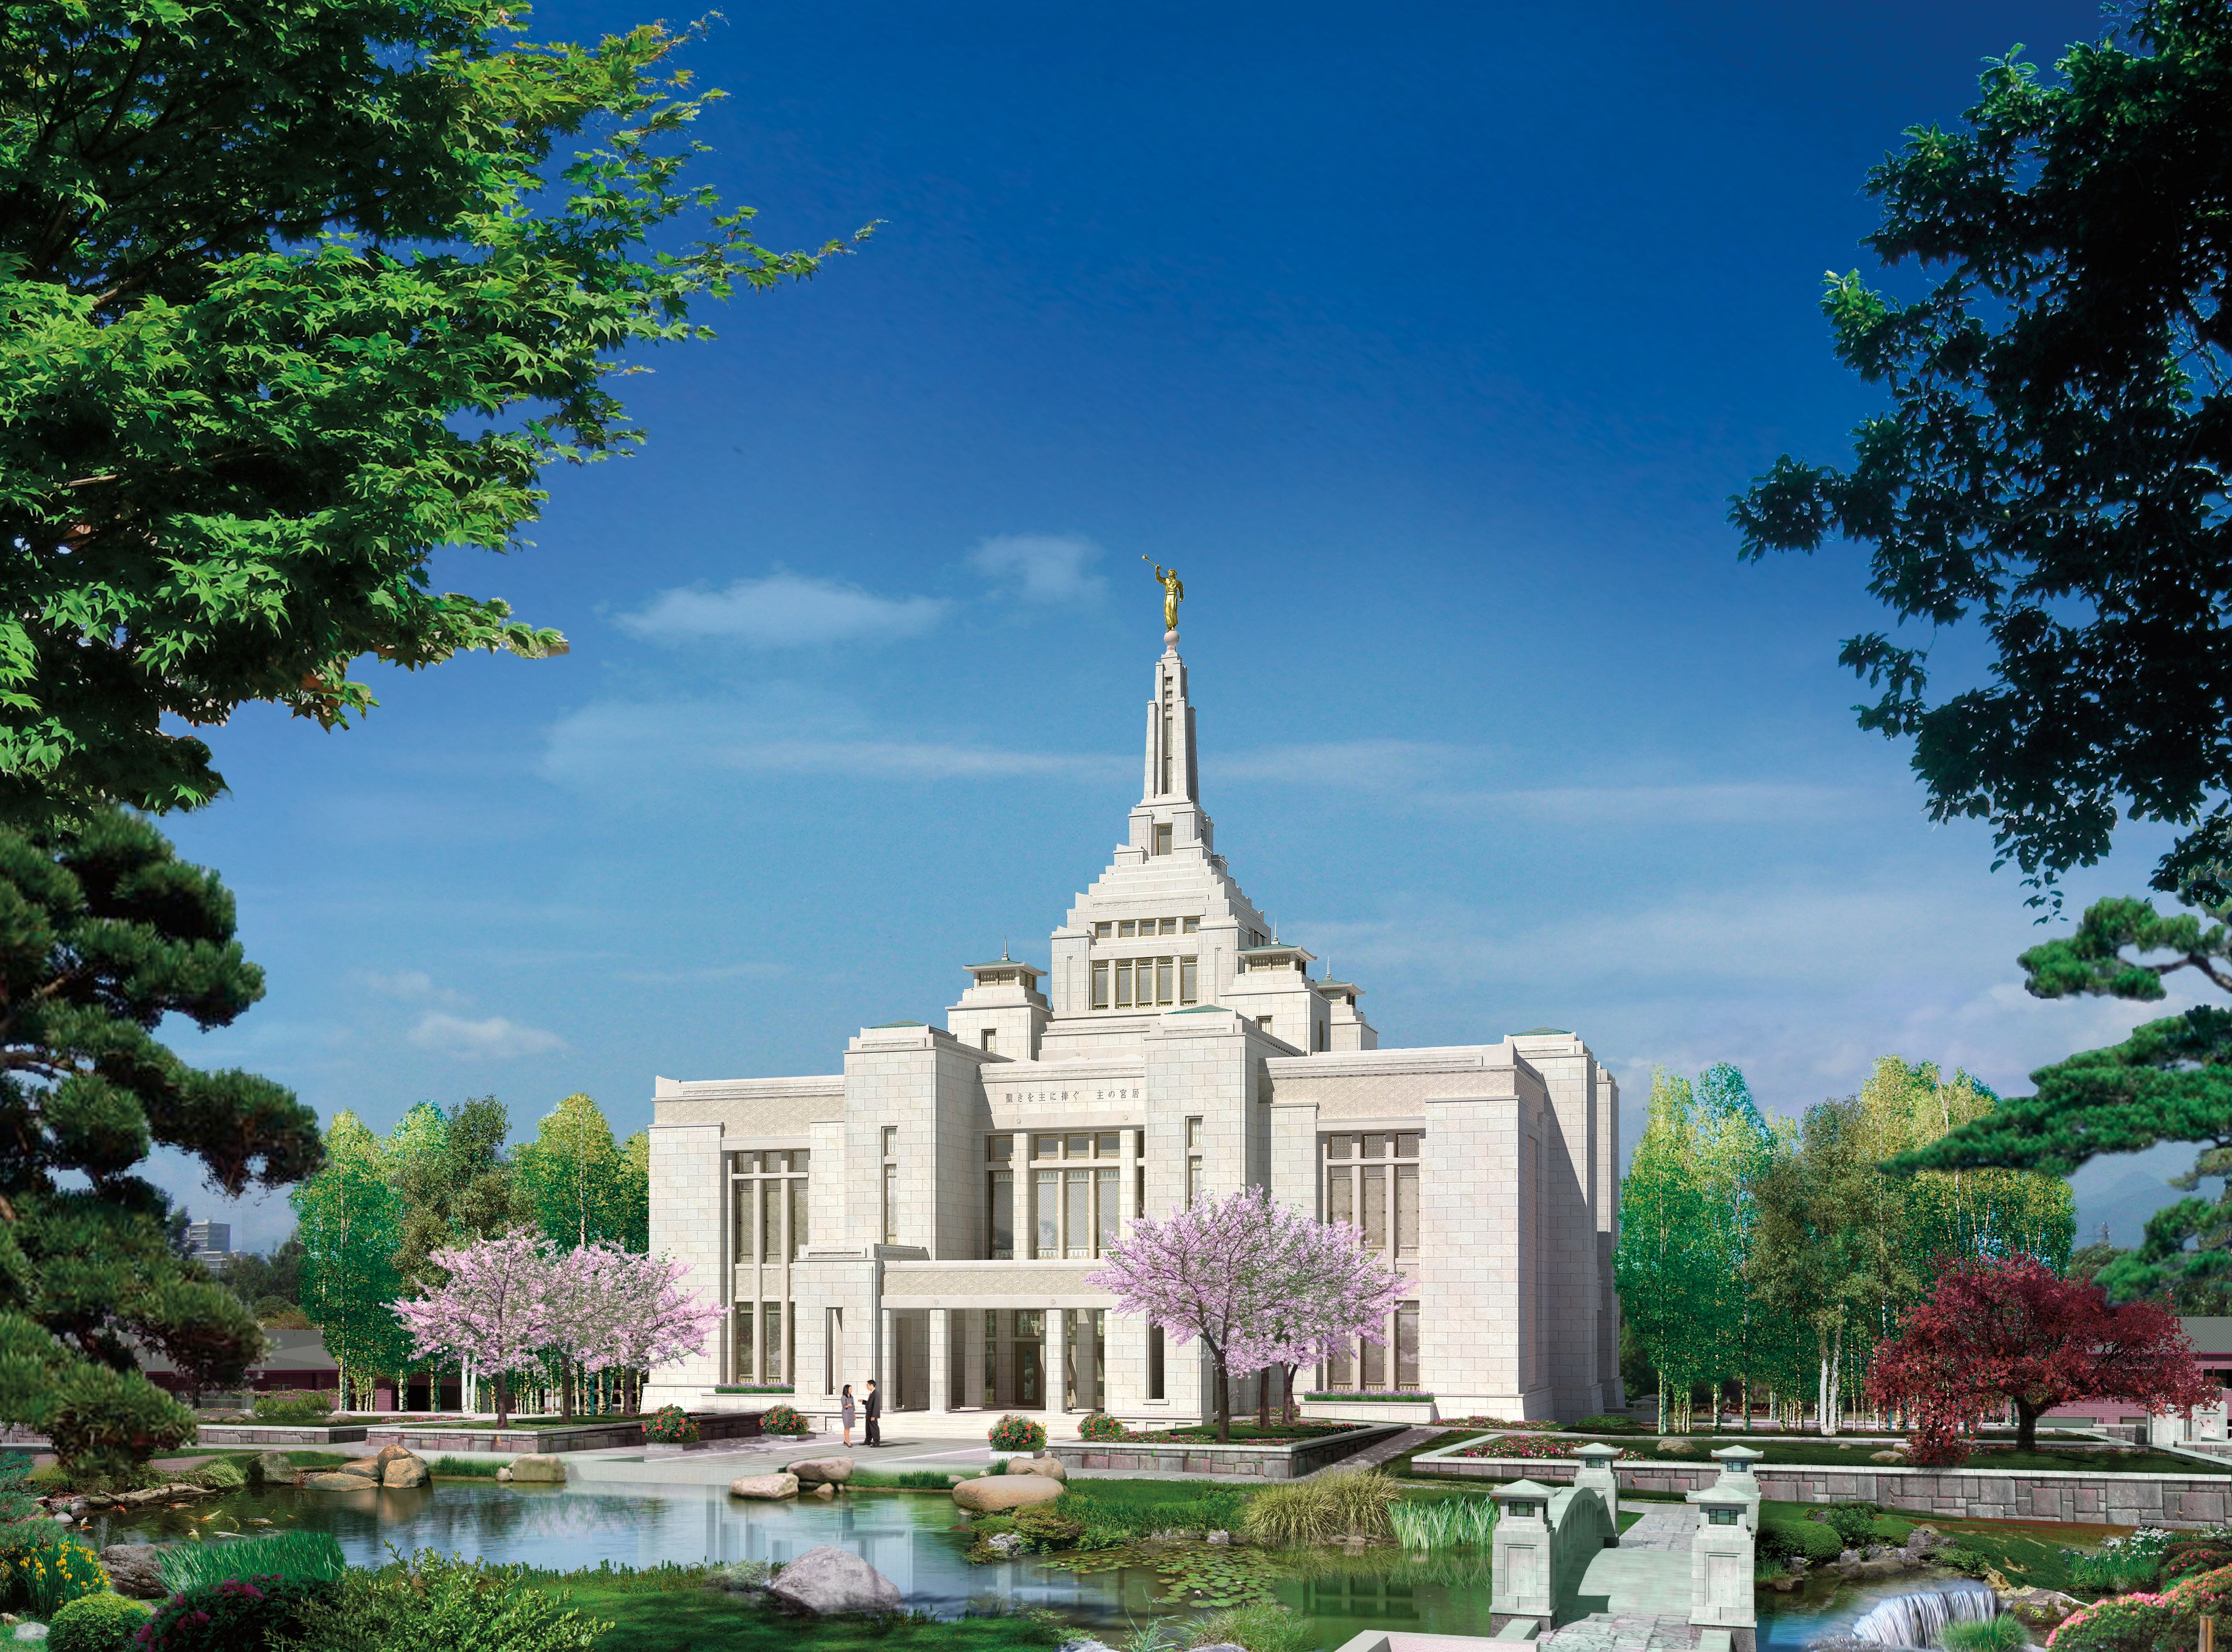 A colorful artistic rendering of the Sapporo Japan Temple.